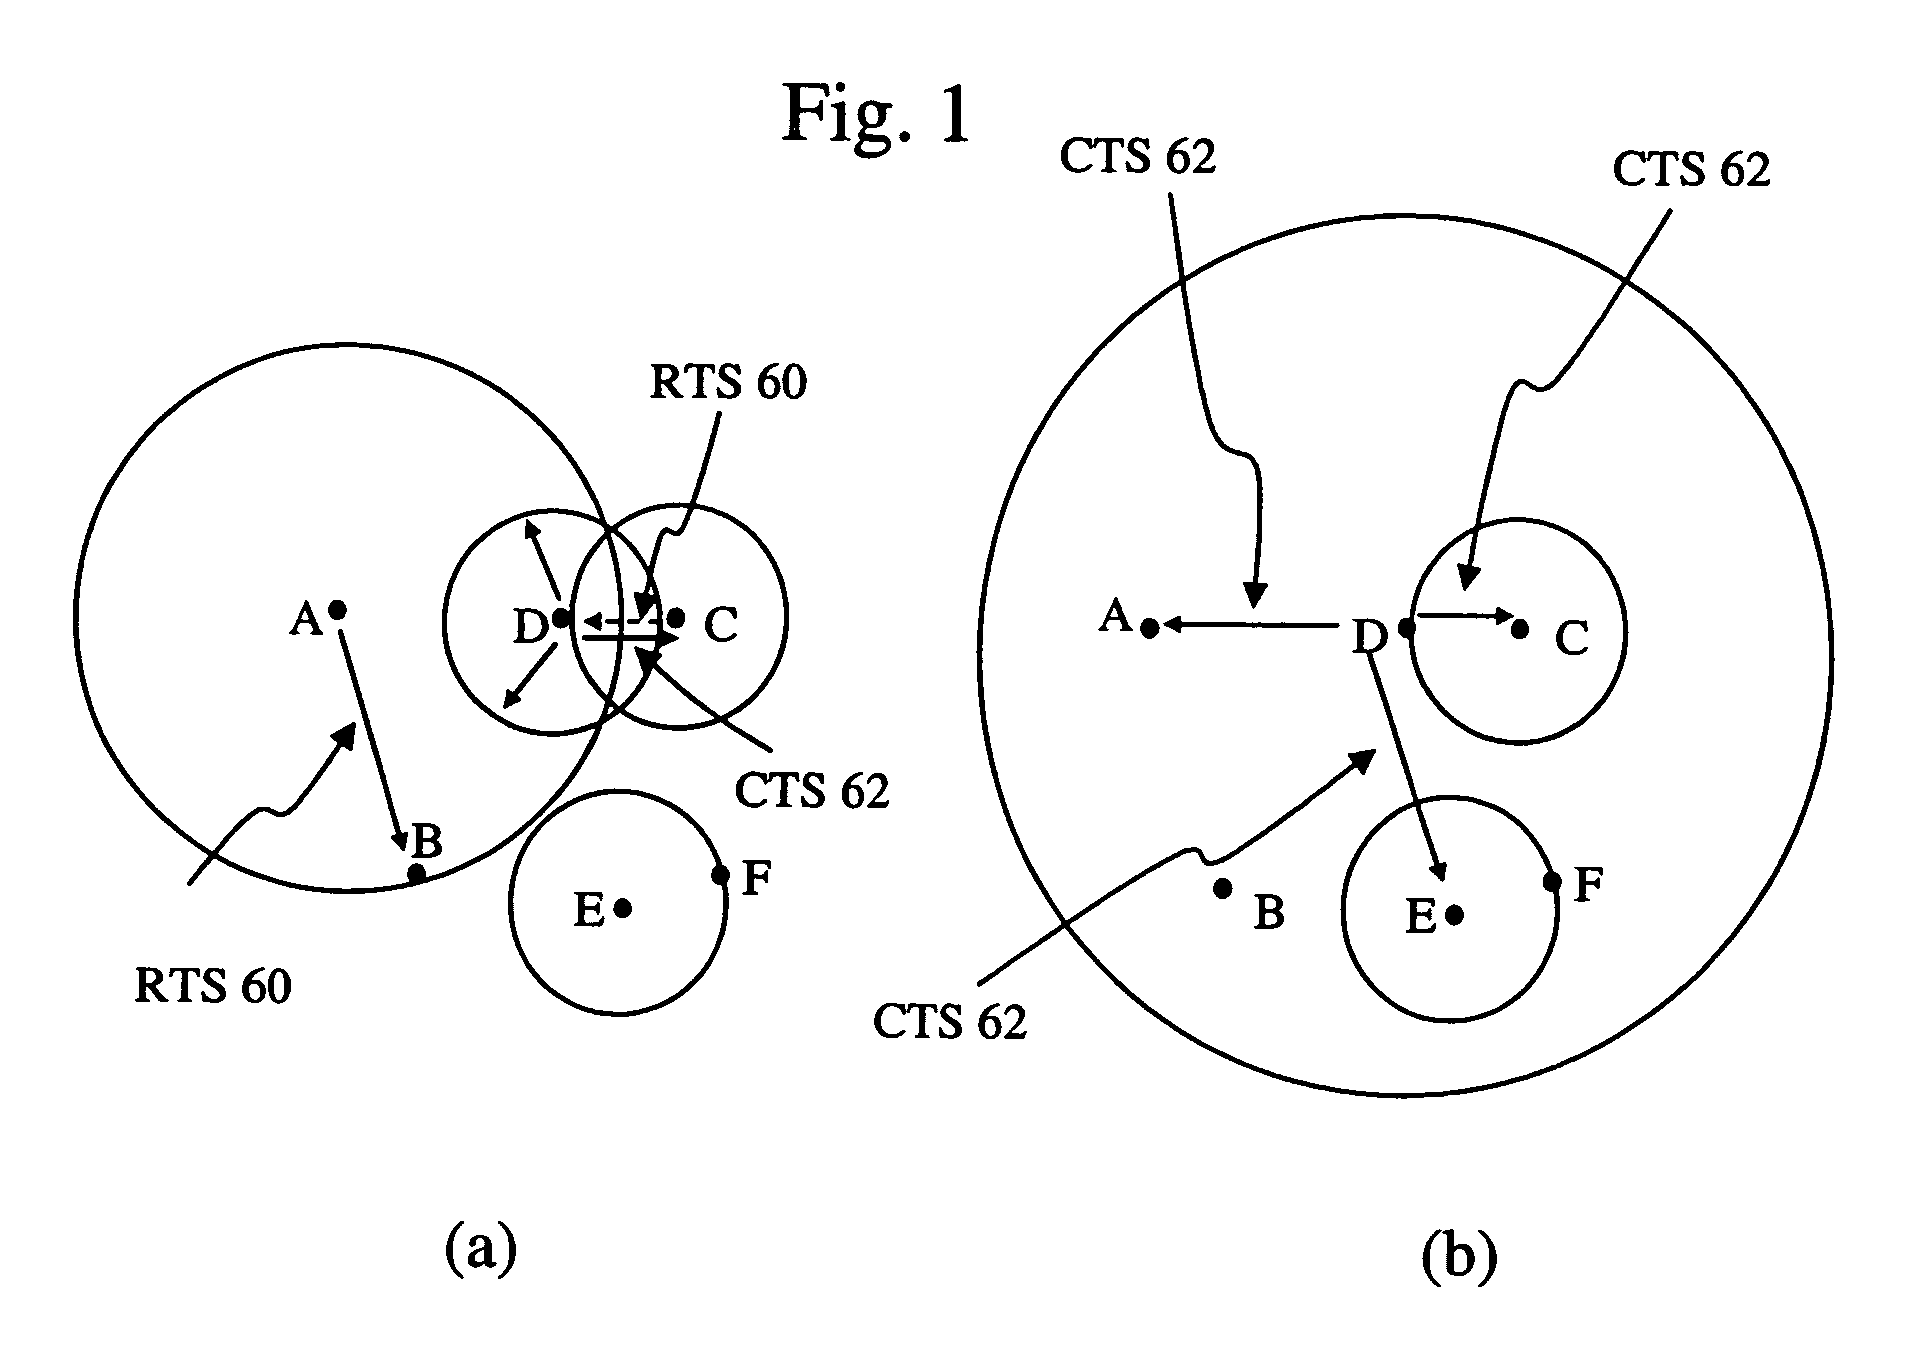 Method of interference management for interference/collision prevention/avoidance and spatial reuse enhancement